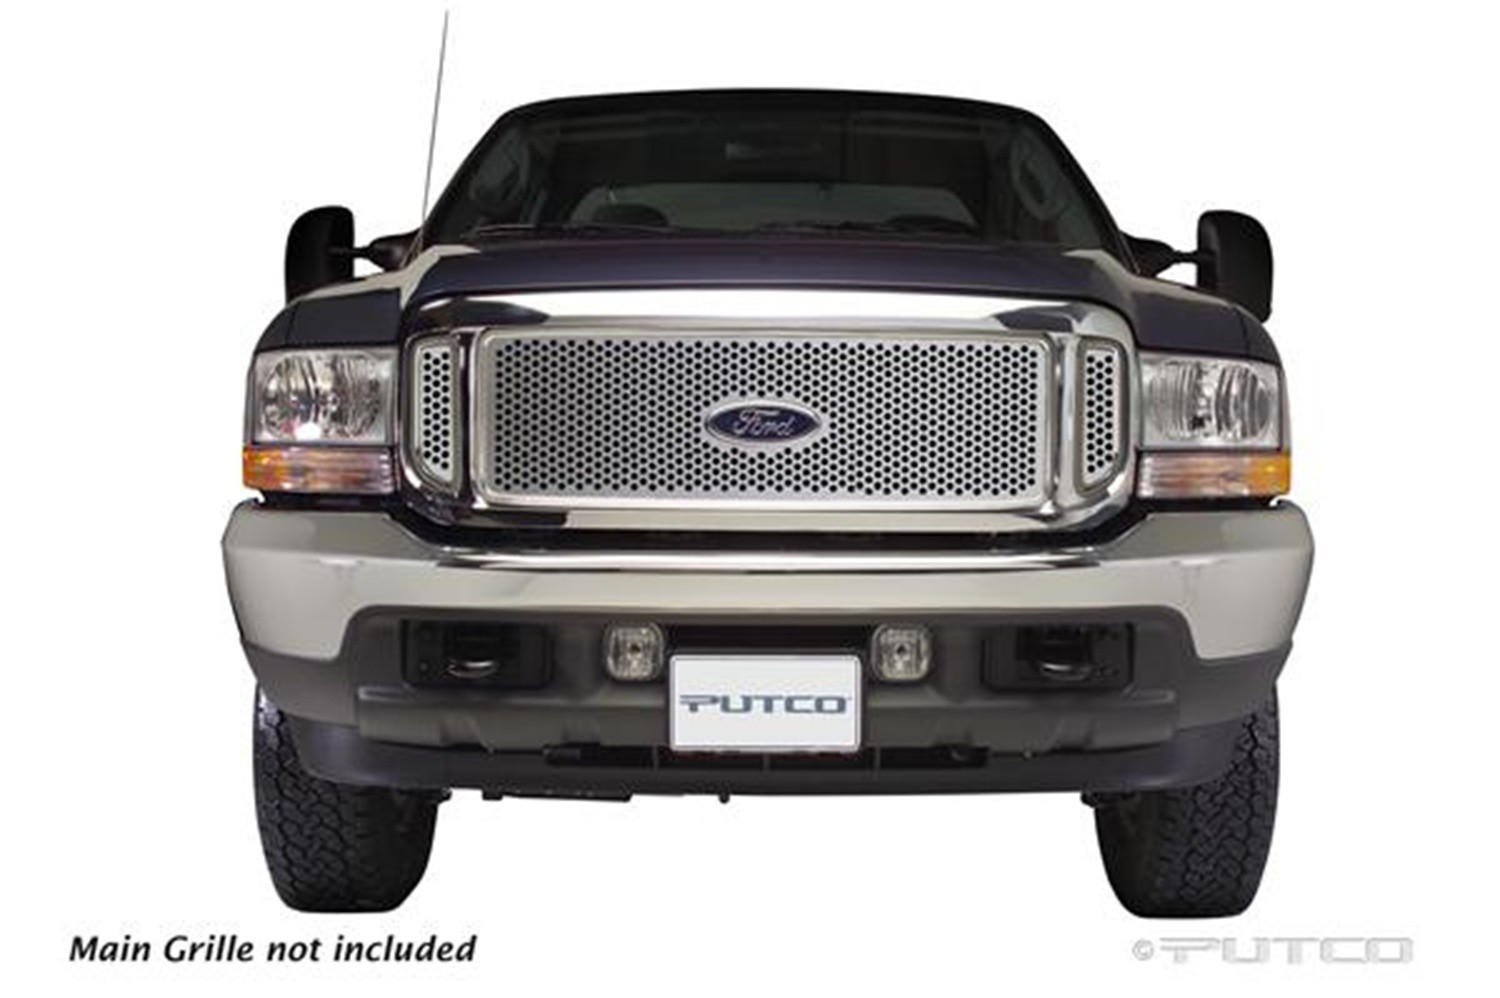 PUTCO - Punch Side Vent Grille Insert - PUT 85105